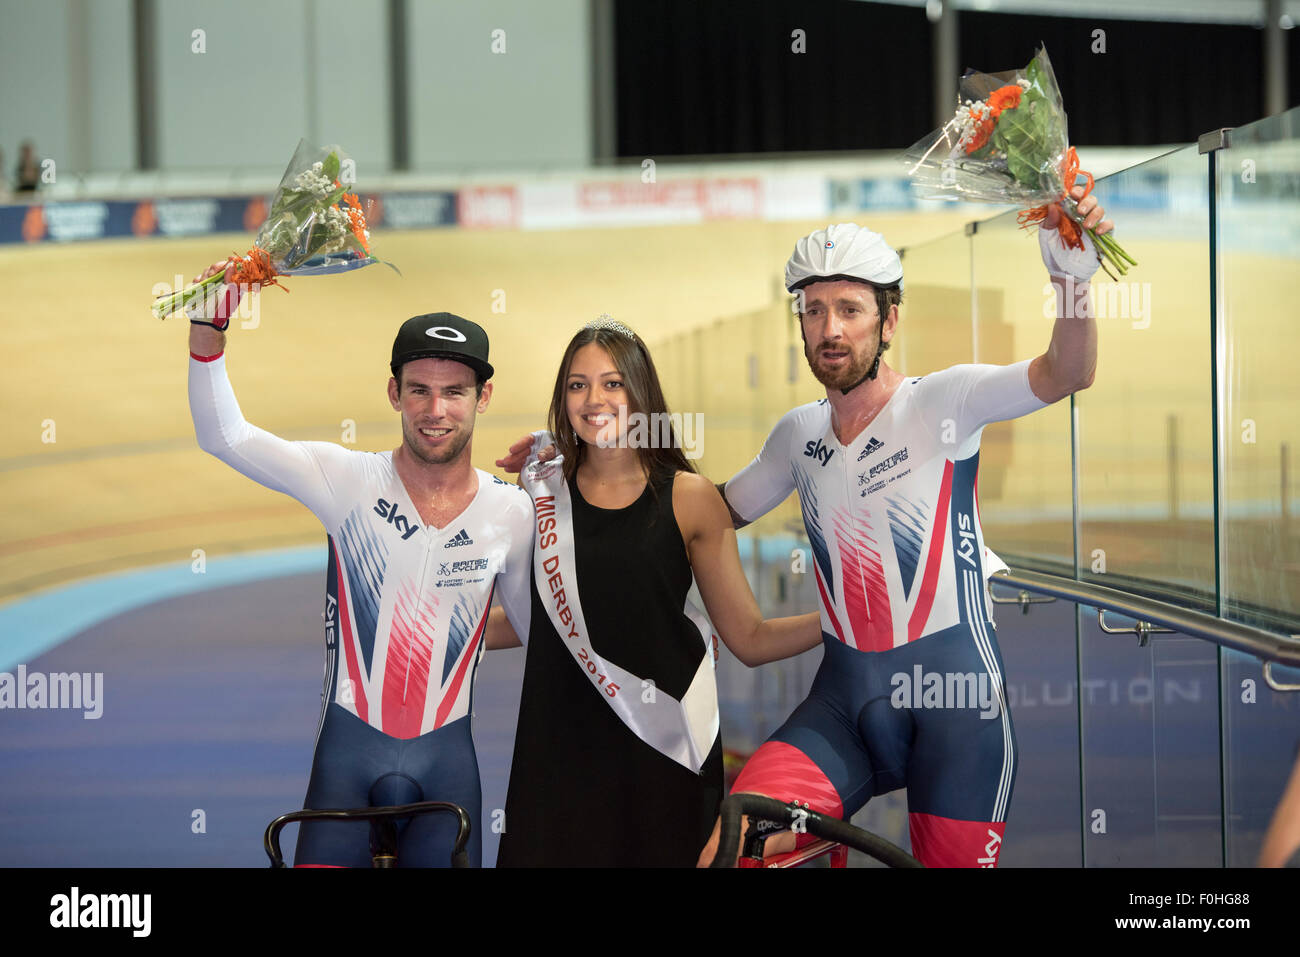 Derby, UK. 16th Aug, 2015. Sir Bradley Wiggins (left) and Mark Cavendish are pictured with Miss Derby following their victory in the madison at the Revolution Series at Derby Arena, Derby, United Kingdom on 16 August 2015. The Revolution Series is a professional track racing series featuring many of the world's best track cyclists. This event, taking place over 3 days from 14-16 August 2015, is an important preparation event for the Rio 2016 Olympic Games, allowing British riders to score qualifying points for the Games. Credit:  Andrew Peat/Alamy Live News Stock Photo